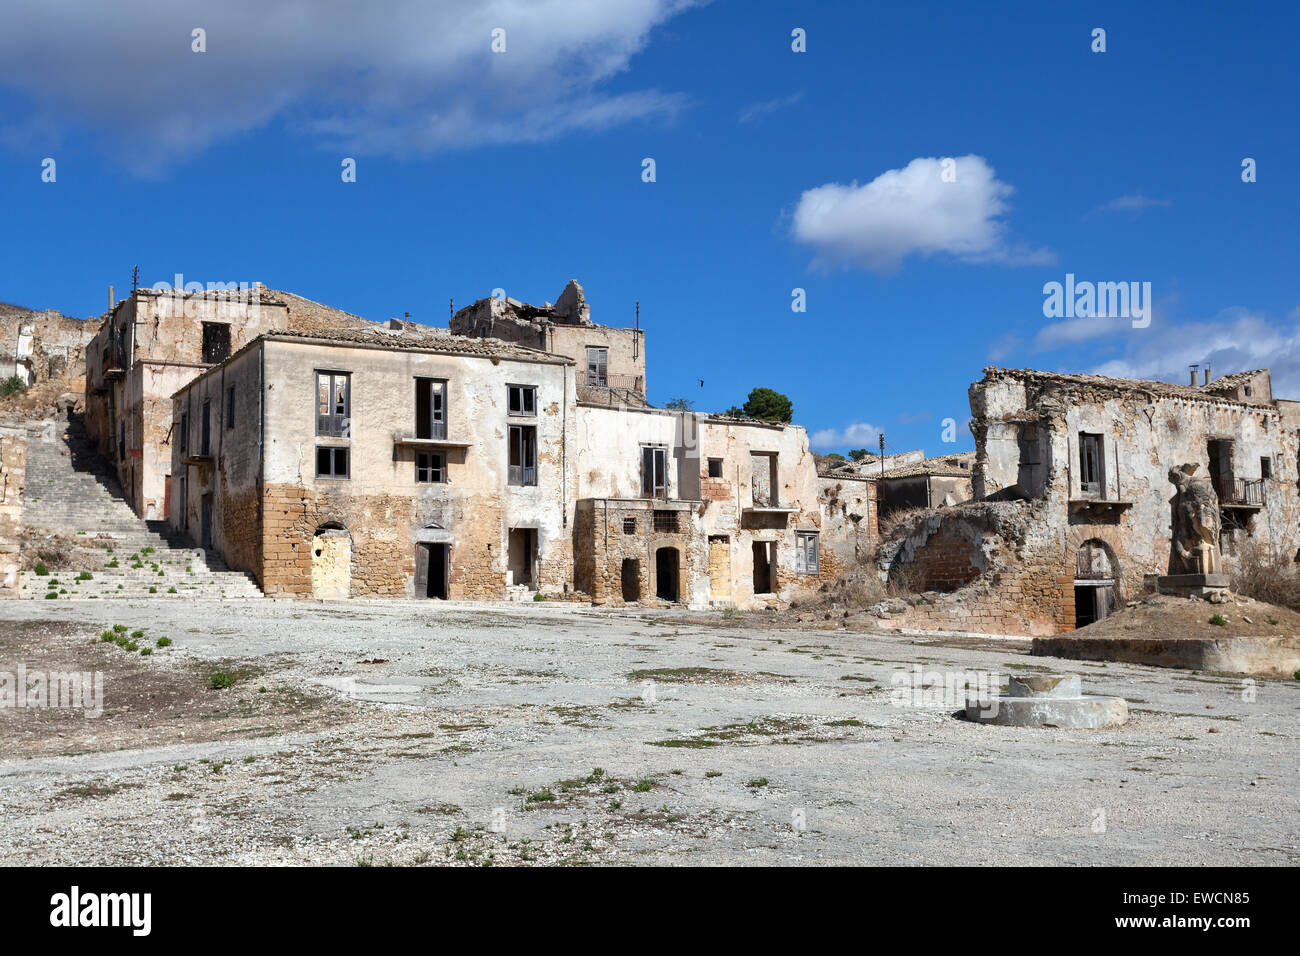 Belice valley, abandoned village Stock Photo